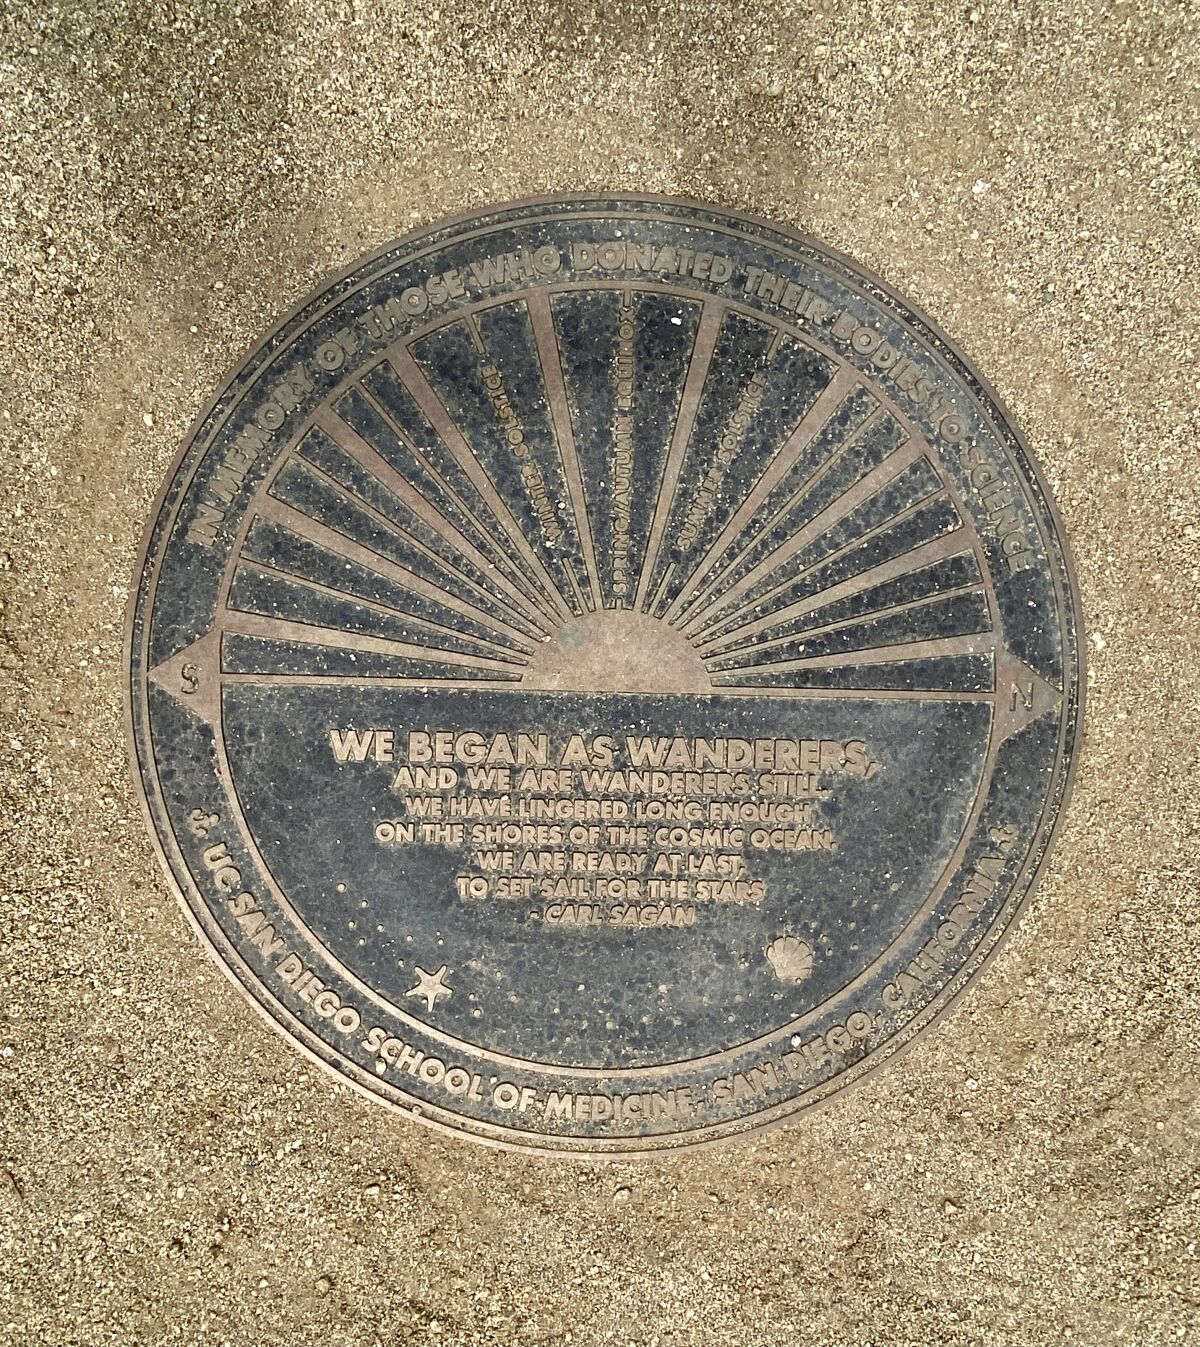 This plaque on the ground at the memorial site will be illuminated by the sun as it shines through the slots in the rocks.